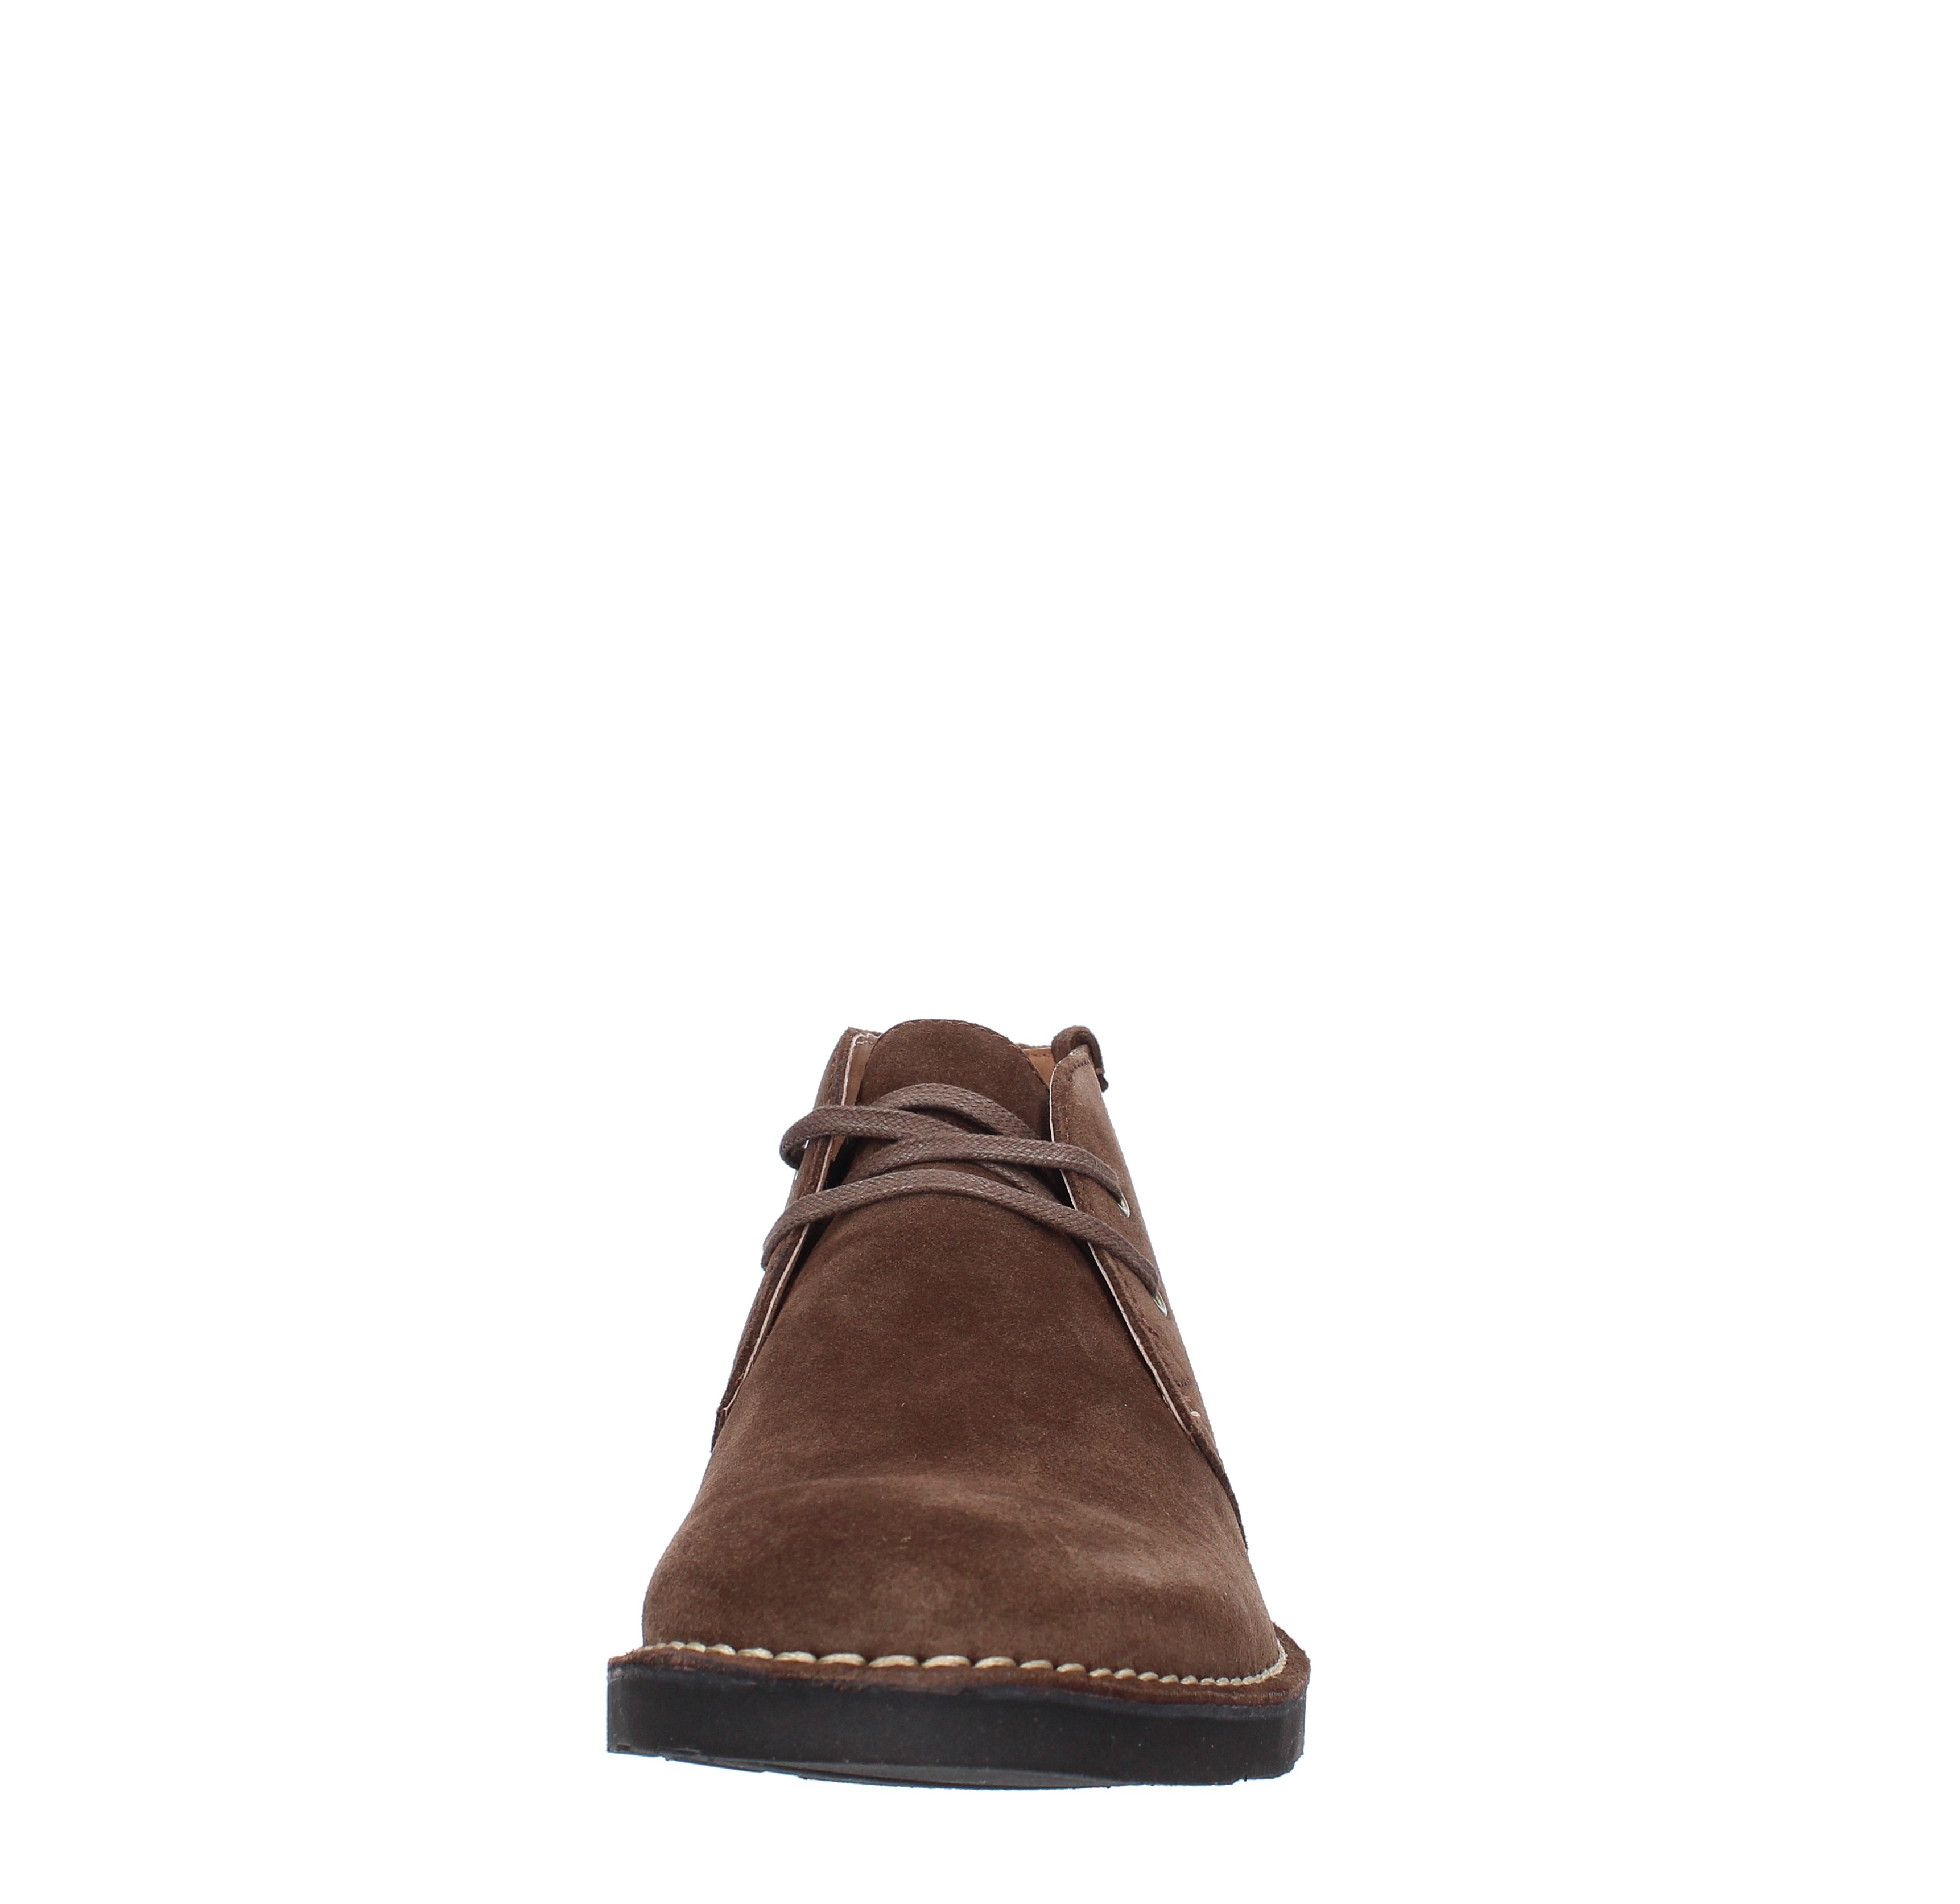 TALAN suede ankle boots - POLO RALPH LAUREN - Ginevra calzature